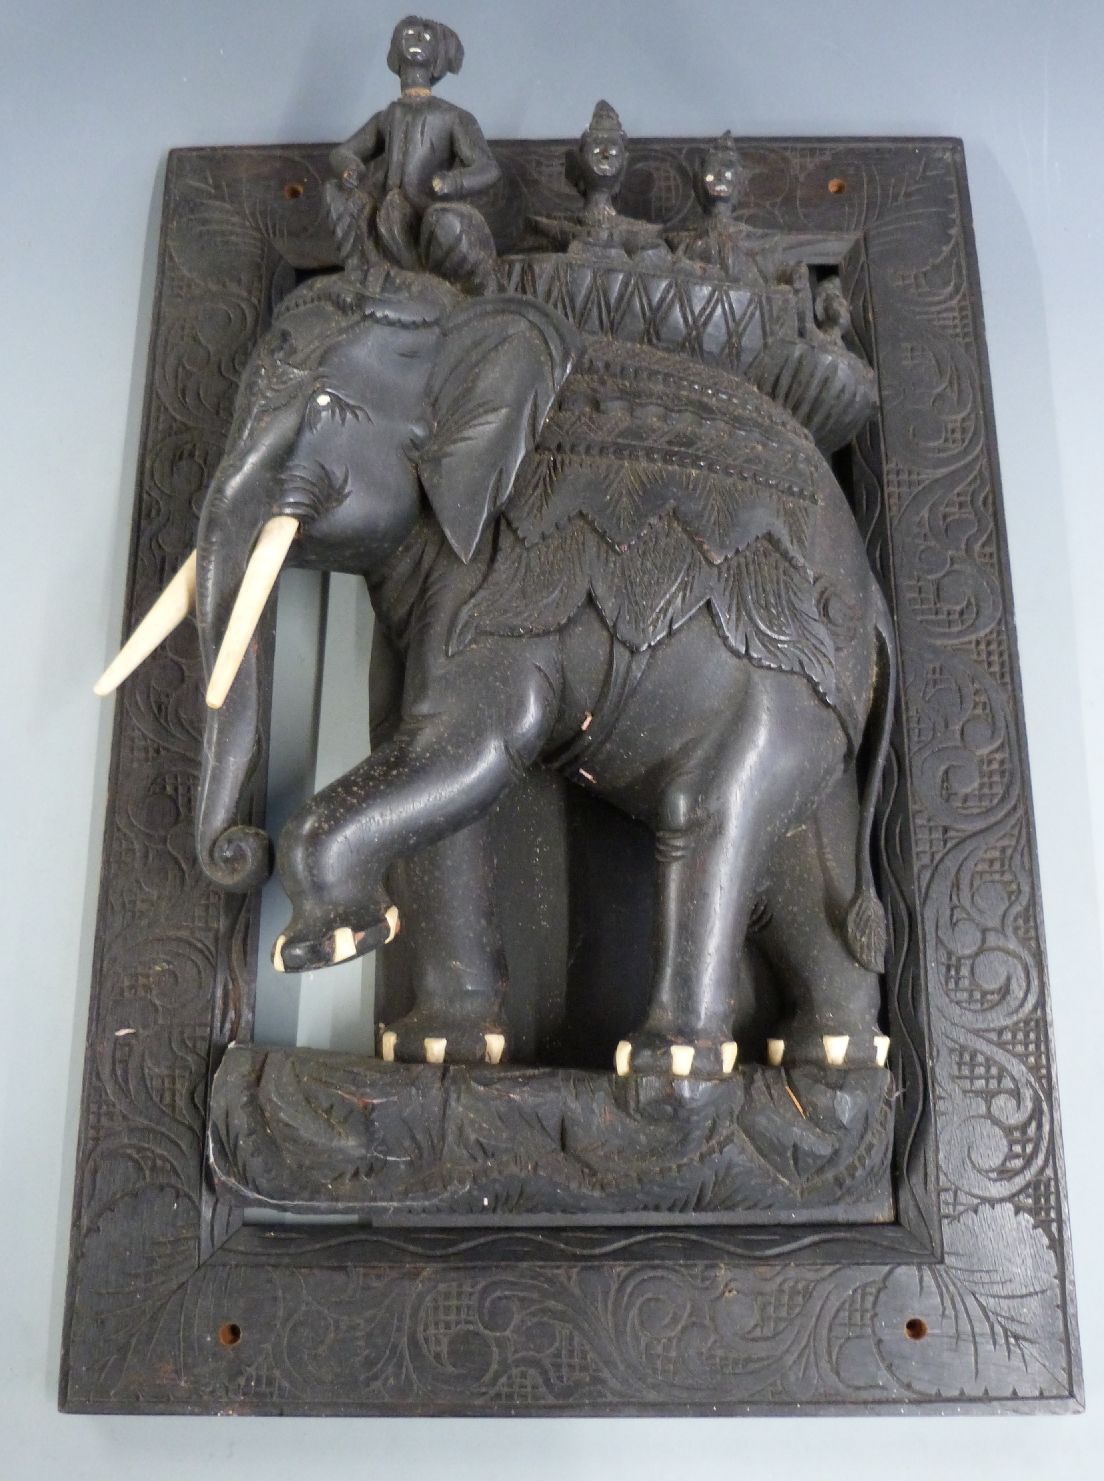 A heavily carved Indian or similar wall plaque featuring four figures atop an elephant